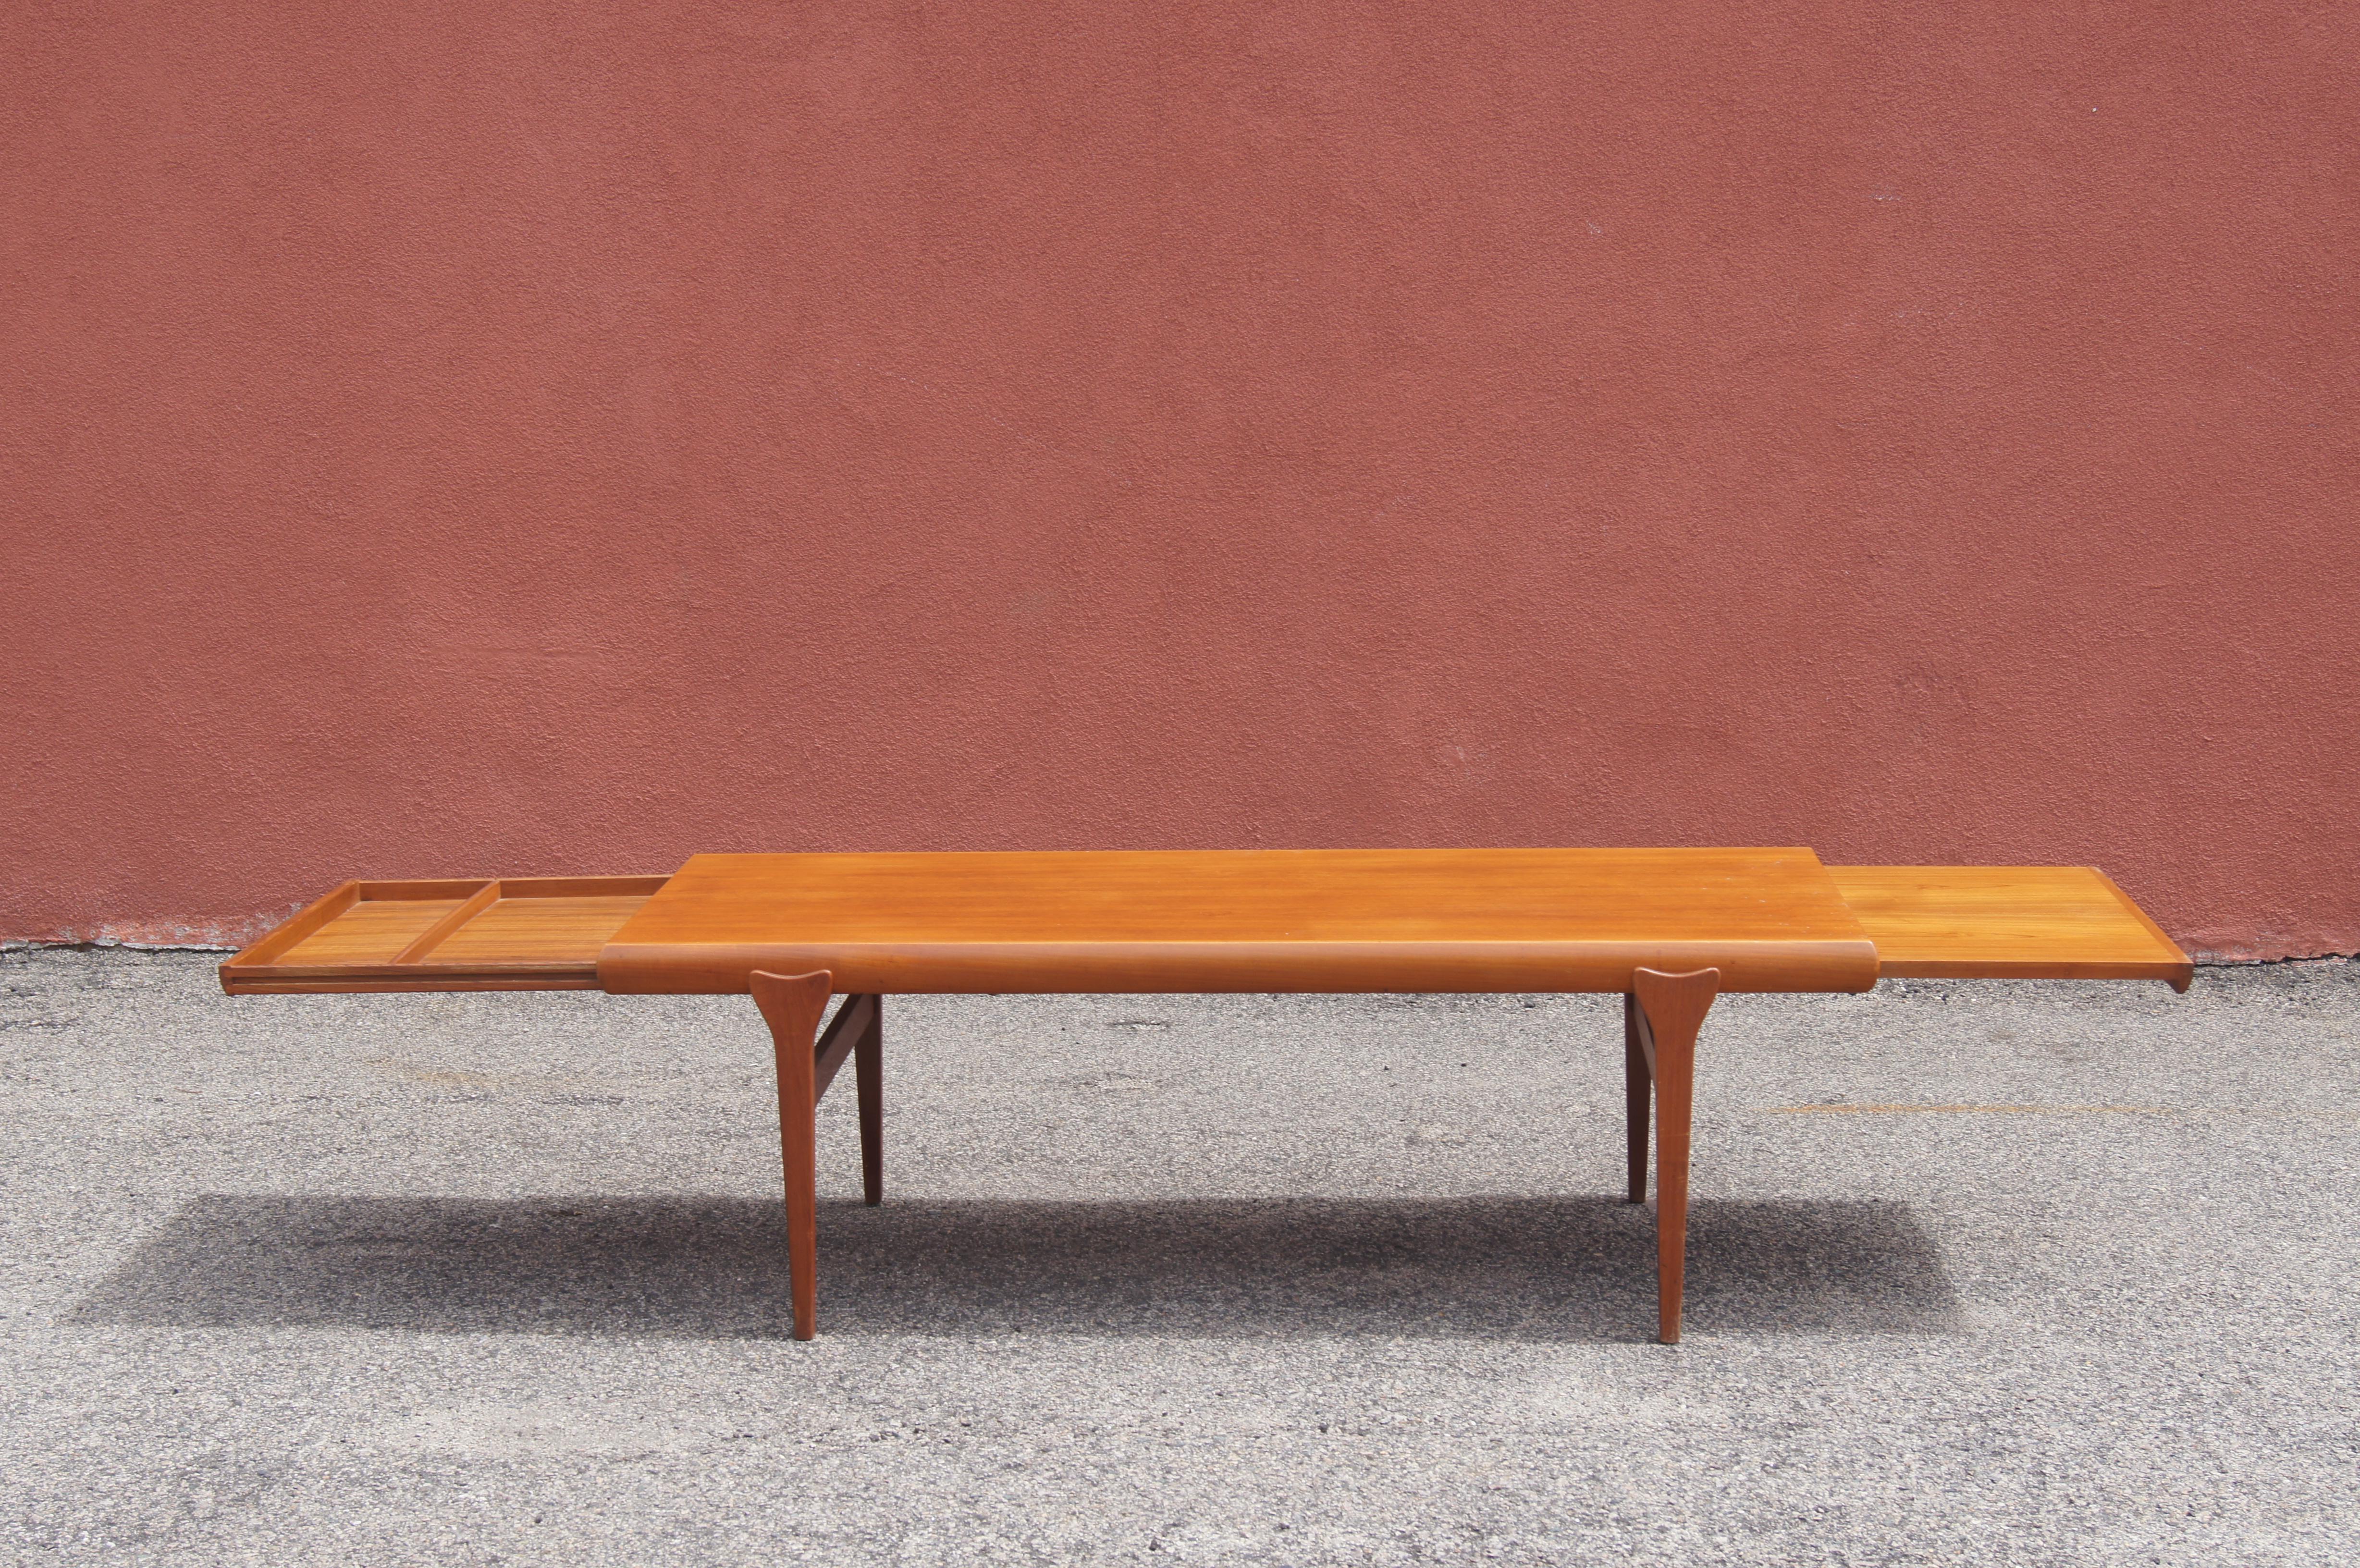 Johannes Andersen designed this mid-century teak coffee table for Uldum Møbelfabrik. Sitting on striking tapered legs, the rectangular teak top has rounded edges that conceal integrated extensions on either side: one 19-inch pullout serves as a